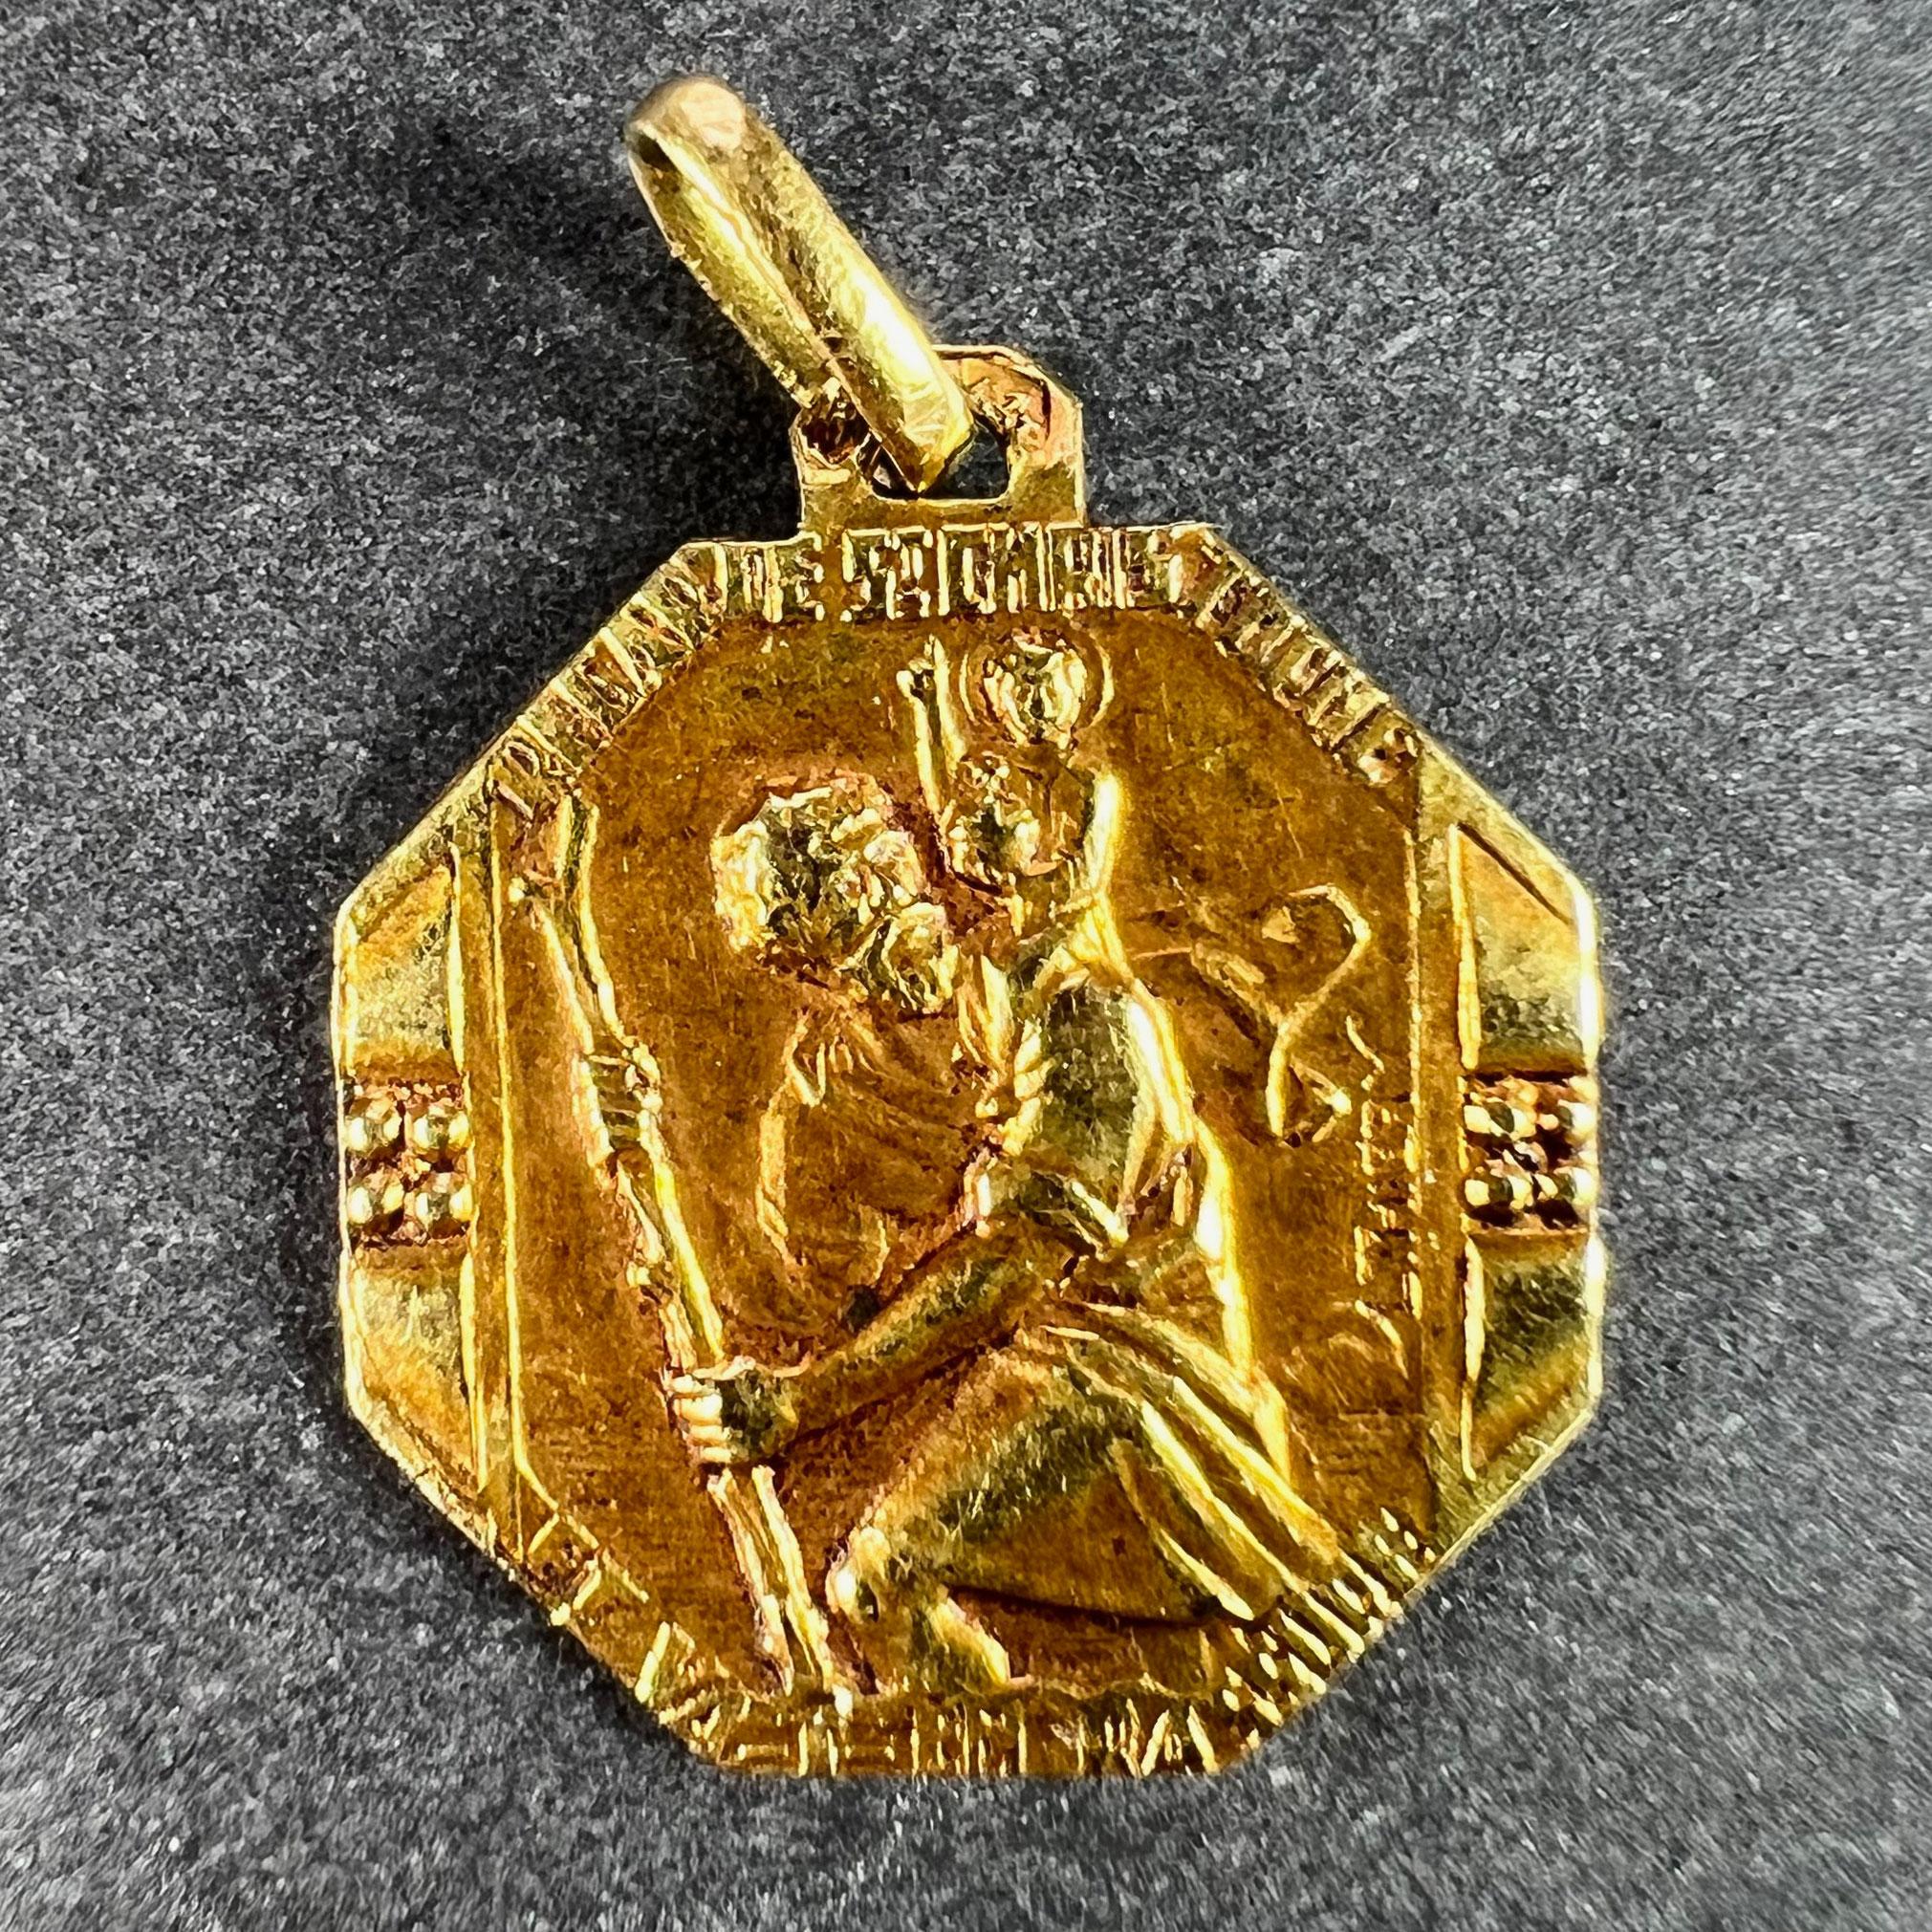 A French 18 karat (18K) yellow gold octagonal charm pendant depicting St Christopher as he carries the infant Christ across a river, with the motto of ‘Regarde St. Christophe et va t’en rassure' around the edge, signed L. Thiery. The reverse depicts